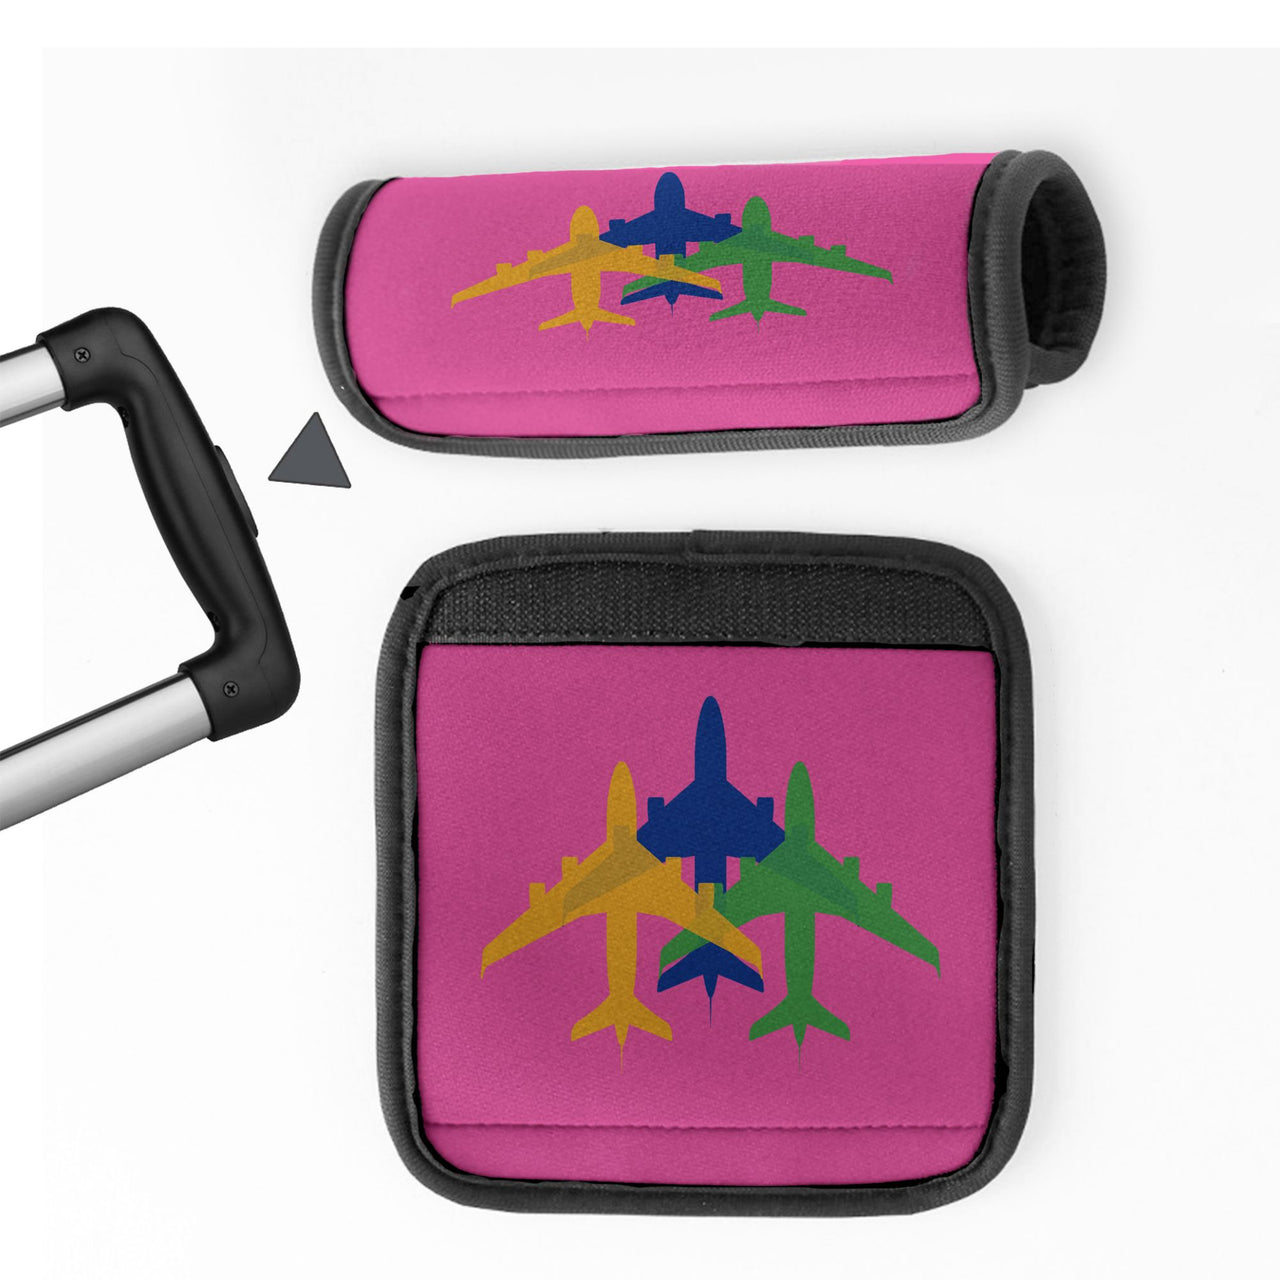 Colourful 3 Airplanes Designed Neoprene Luggage Handle Covers